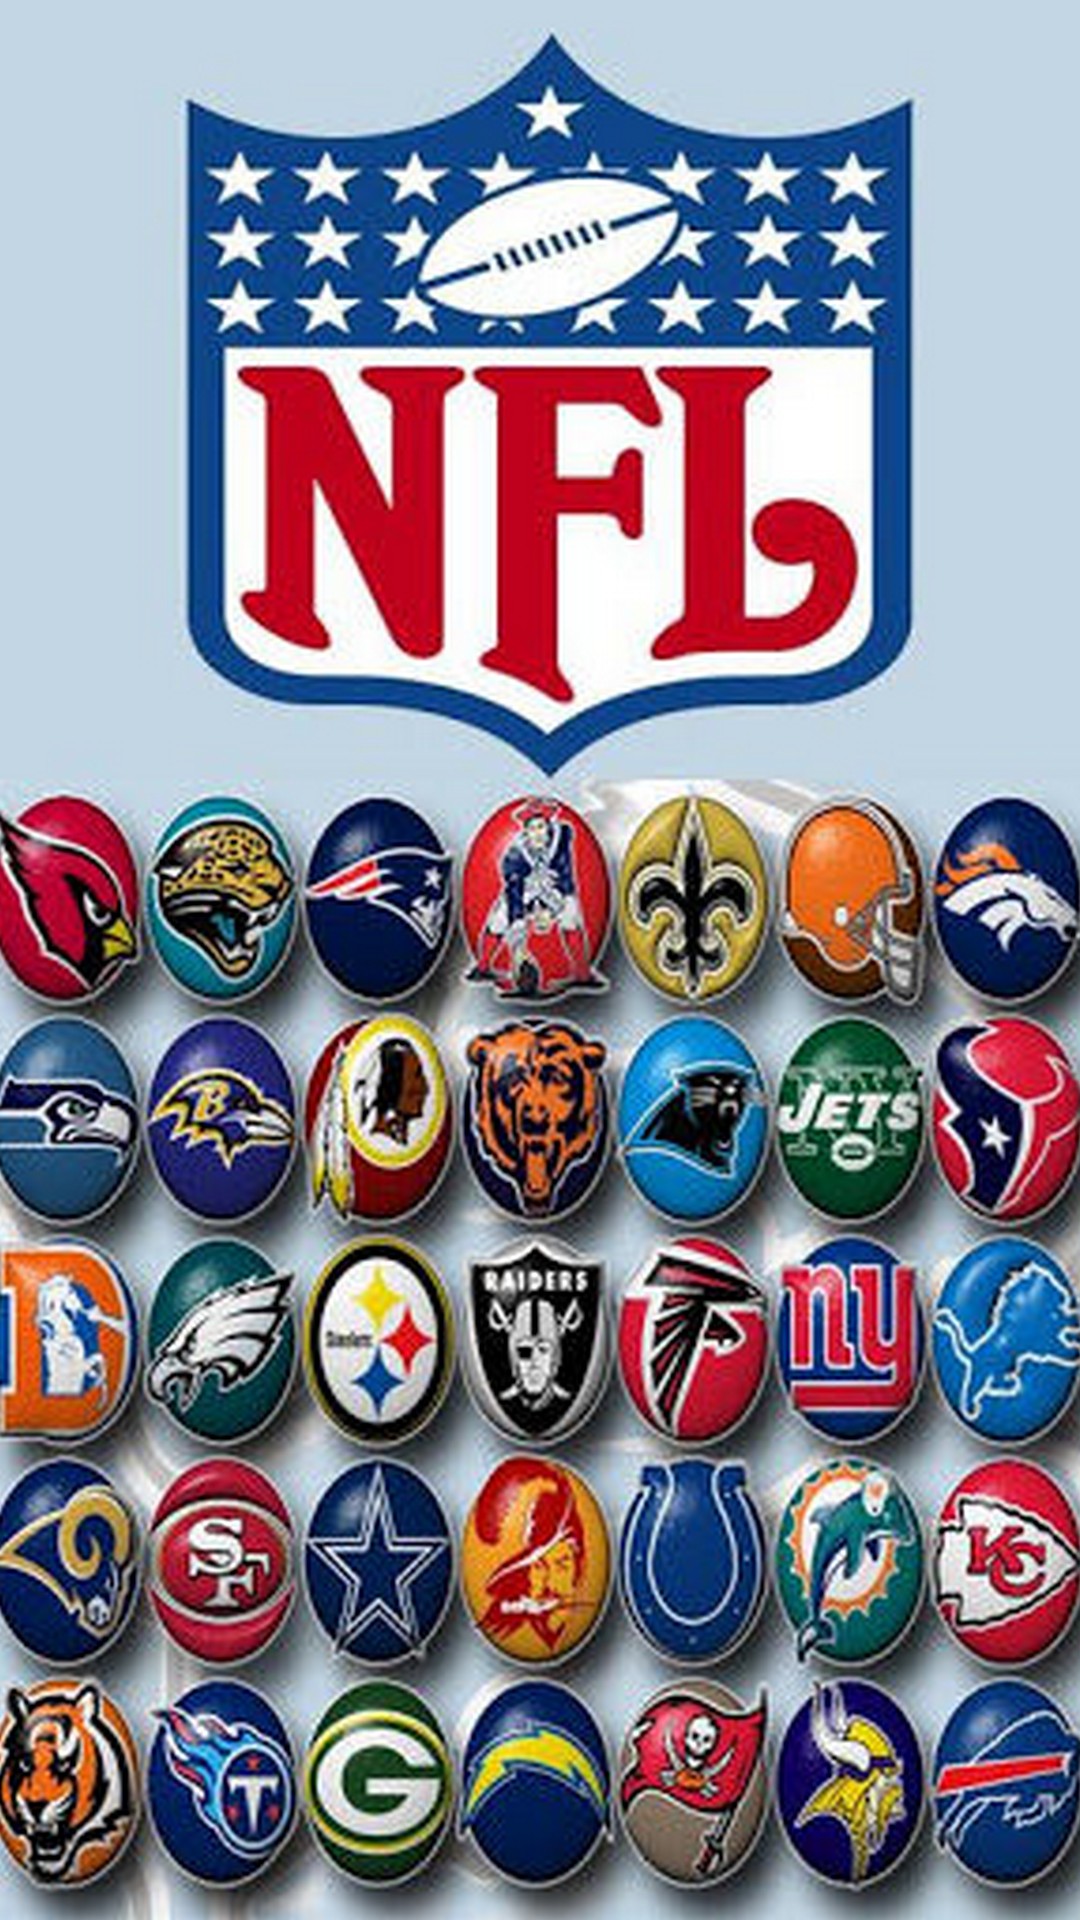 NFL iPhone 8 Plus Wallpaper With high-resolution 1080X1920 pixel. Download and set as wallpaper for Apple iPhone X, XS Max, XR, 8, 7, 6, SE, iPad, Android